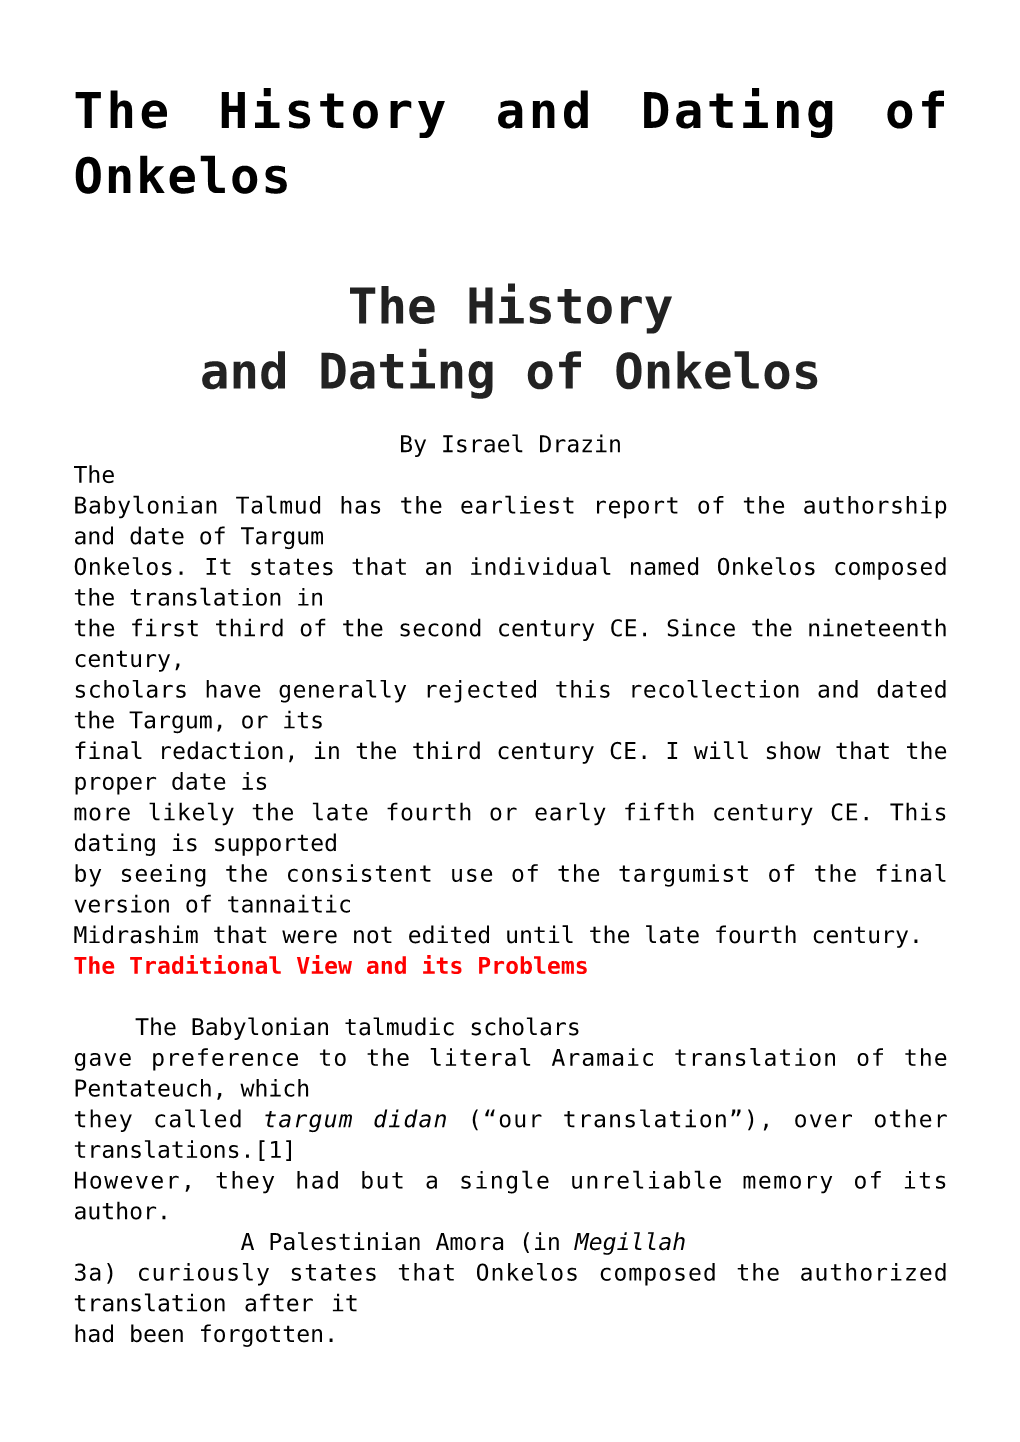 The History and Dating of Onkelos